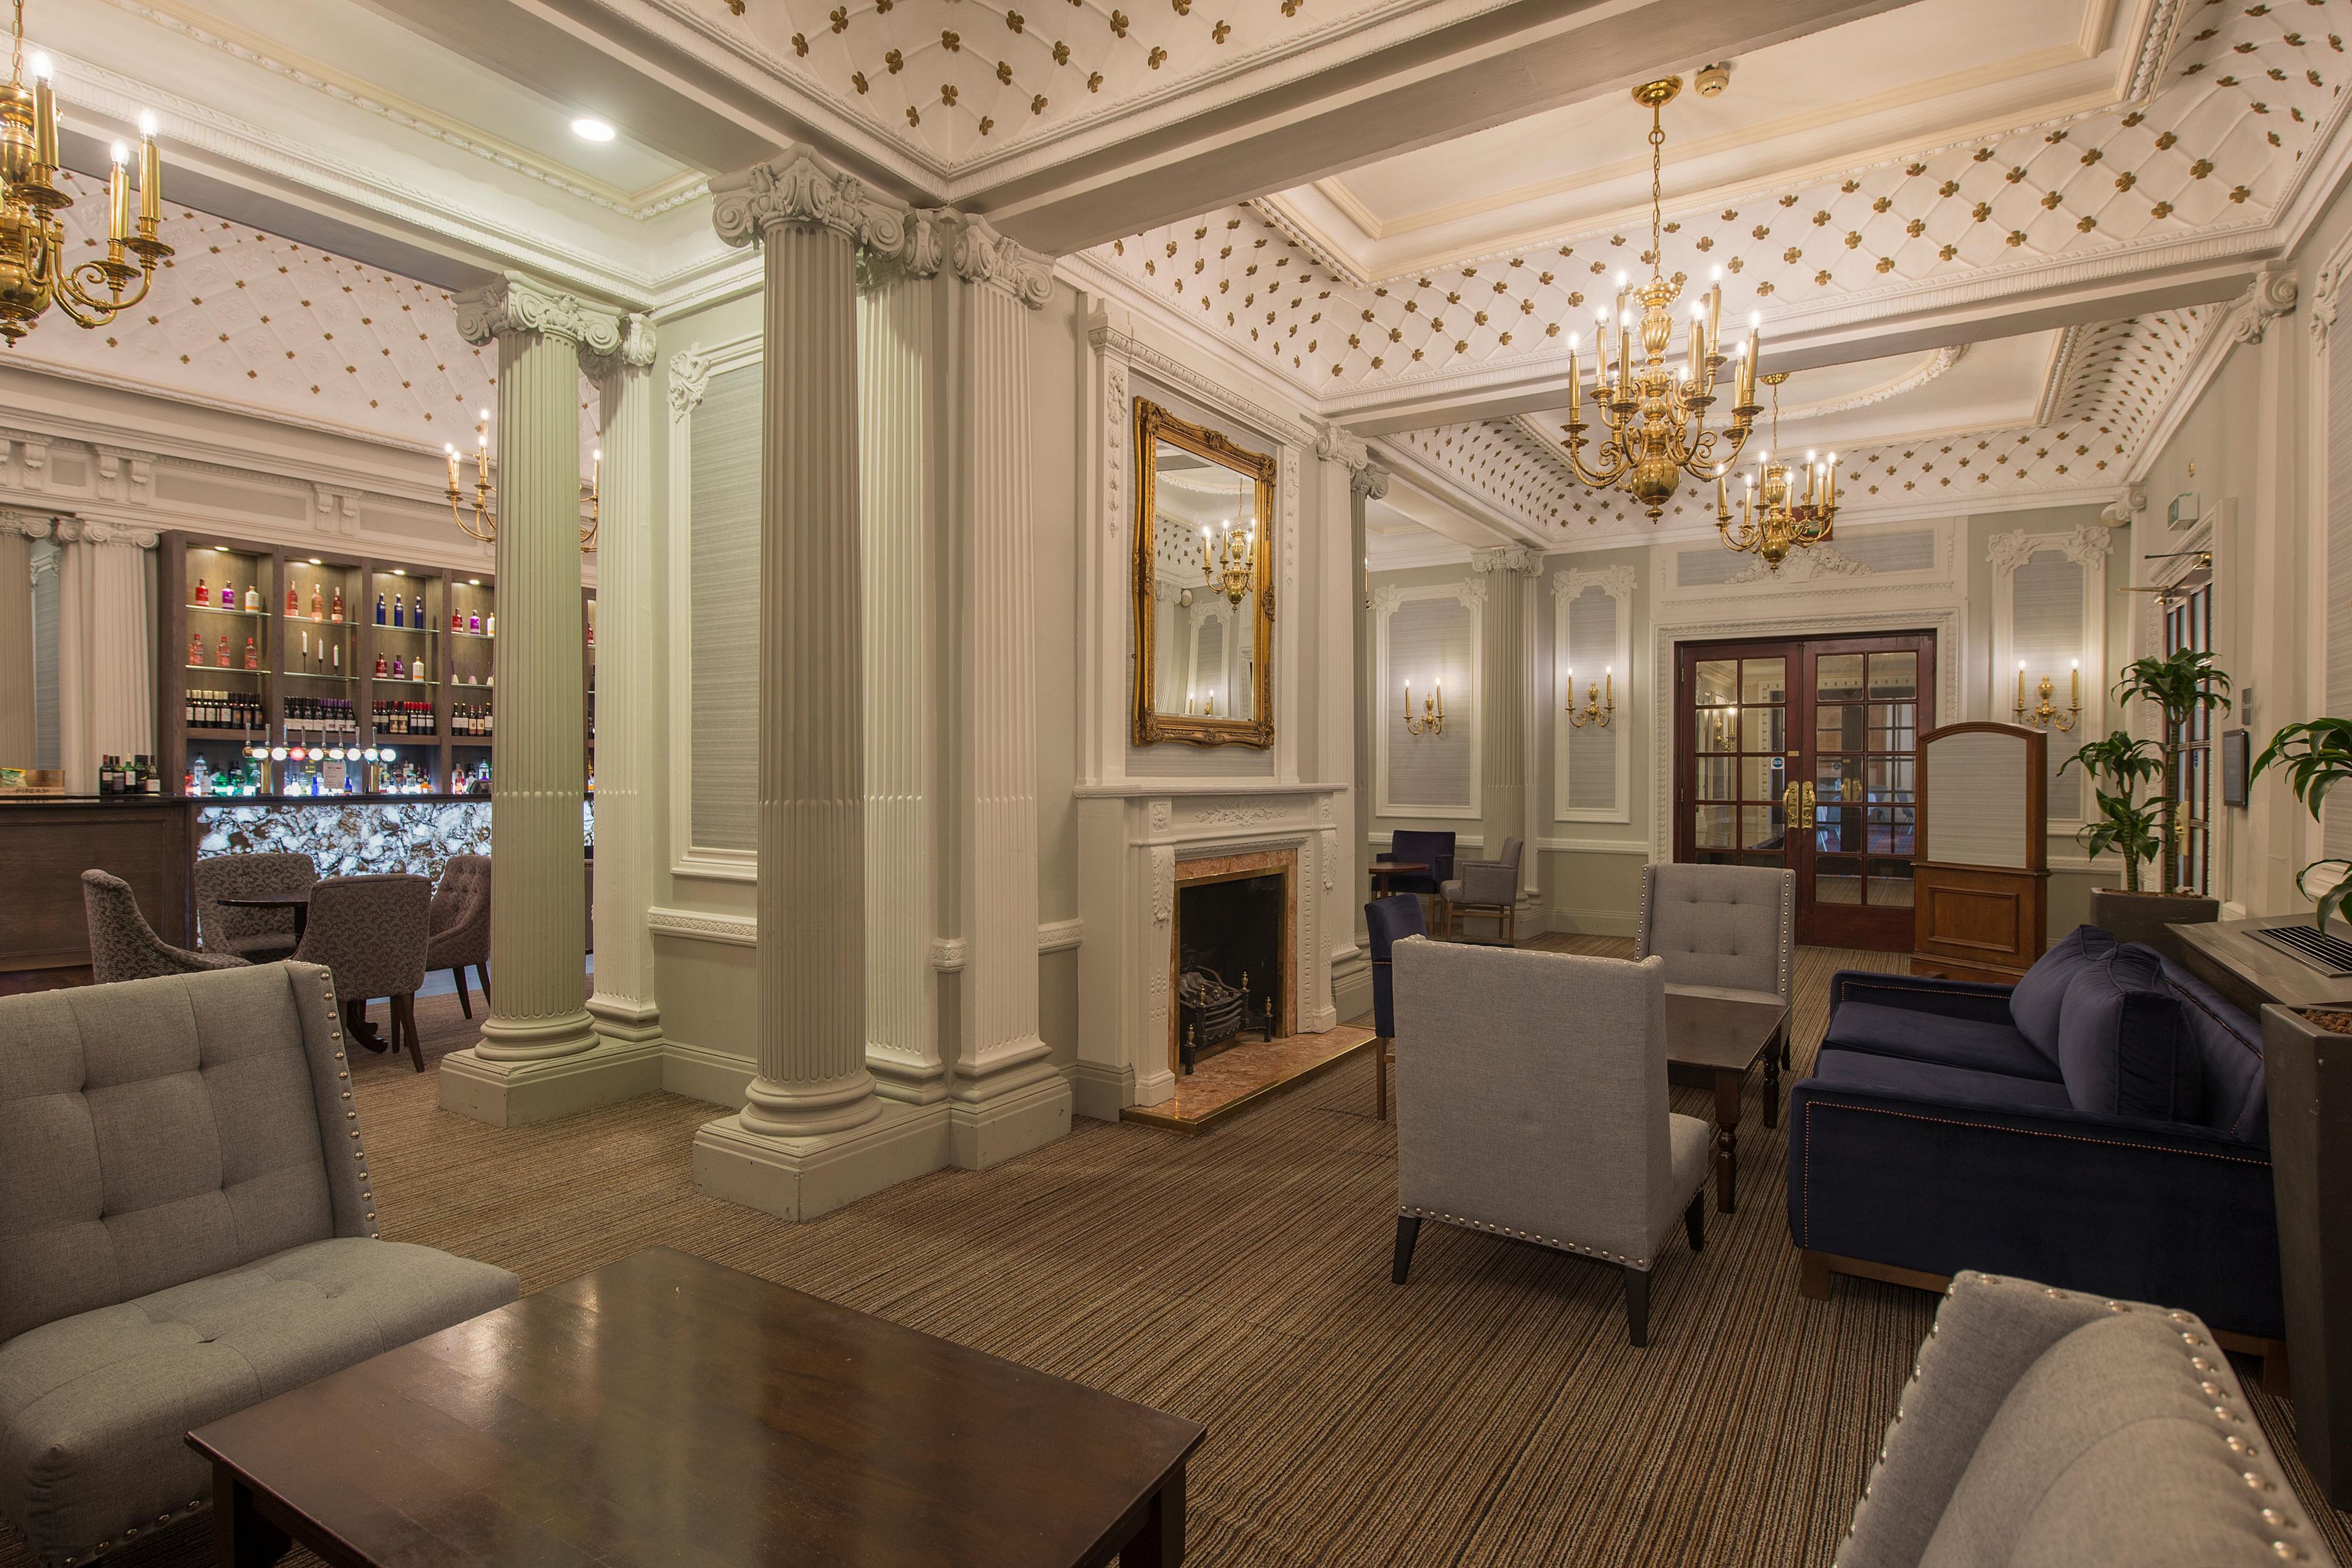 Relax and unwind in our Grand Lounge bar